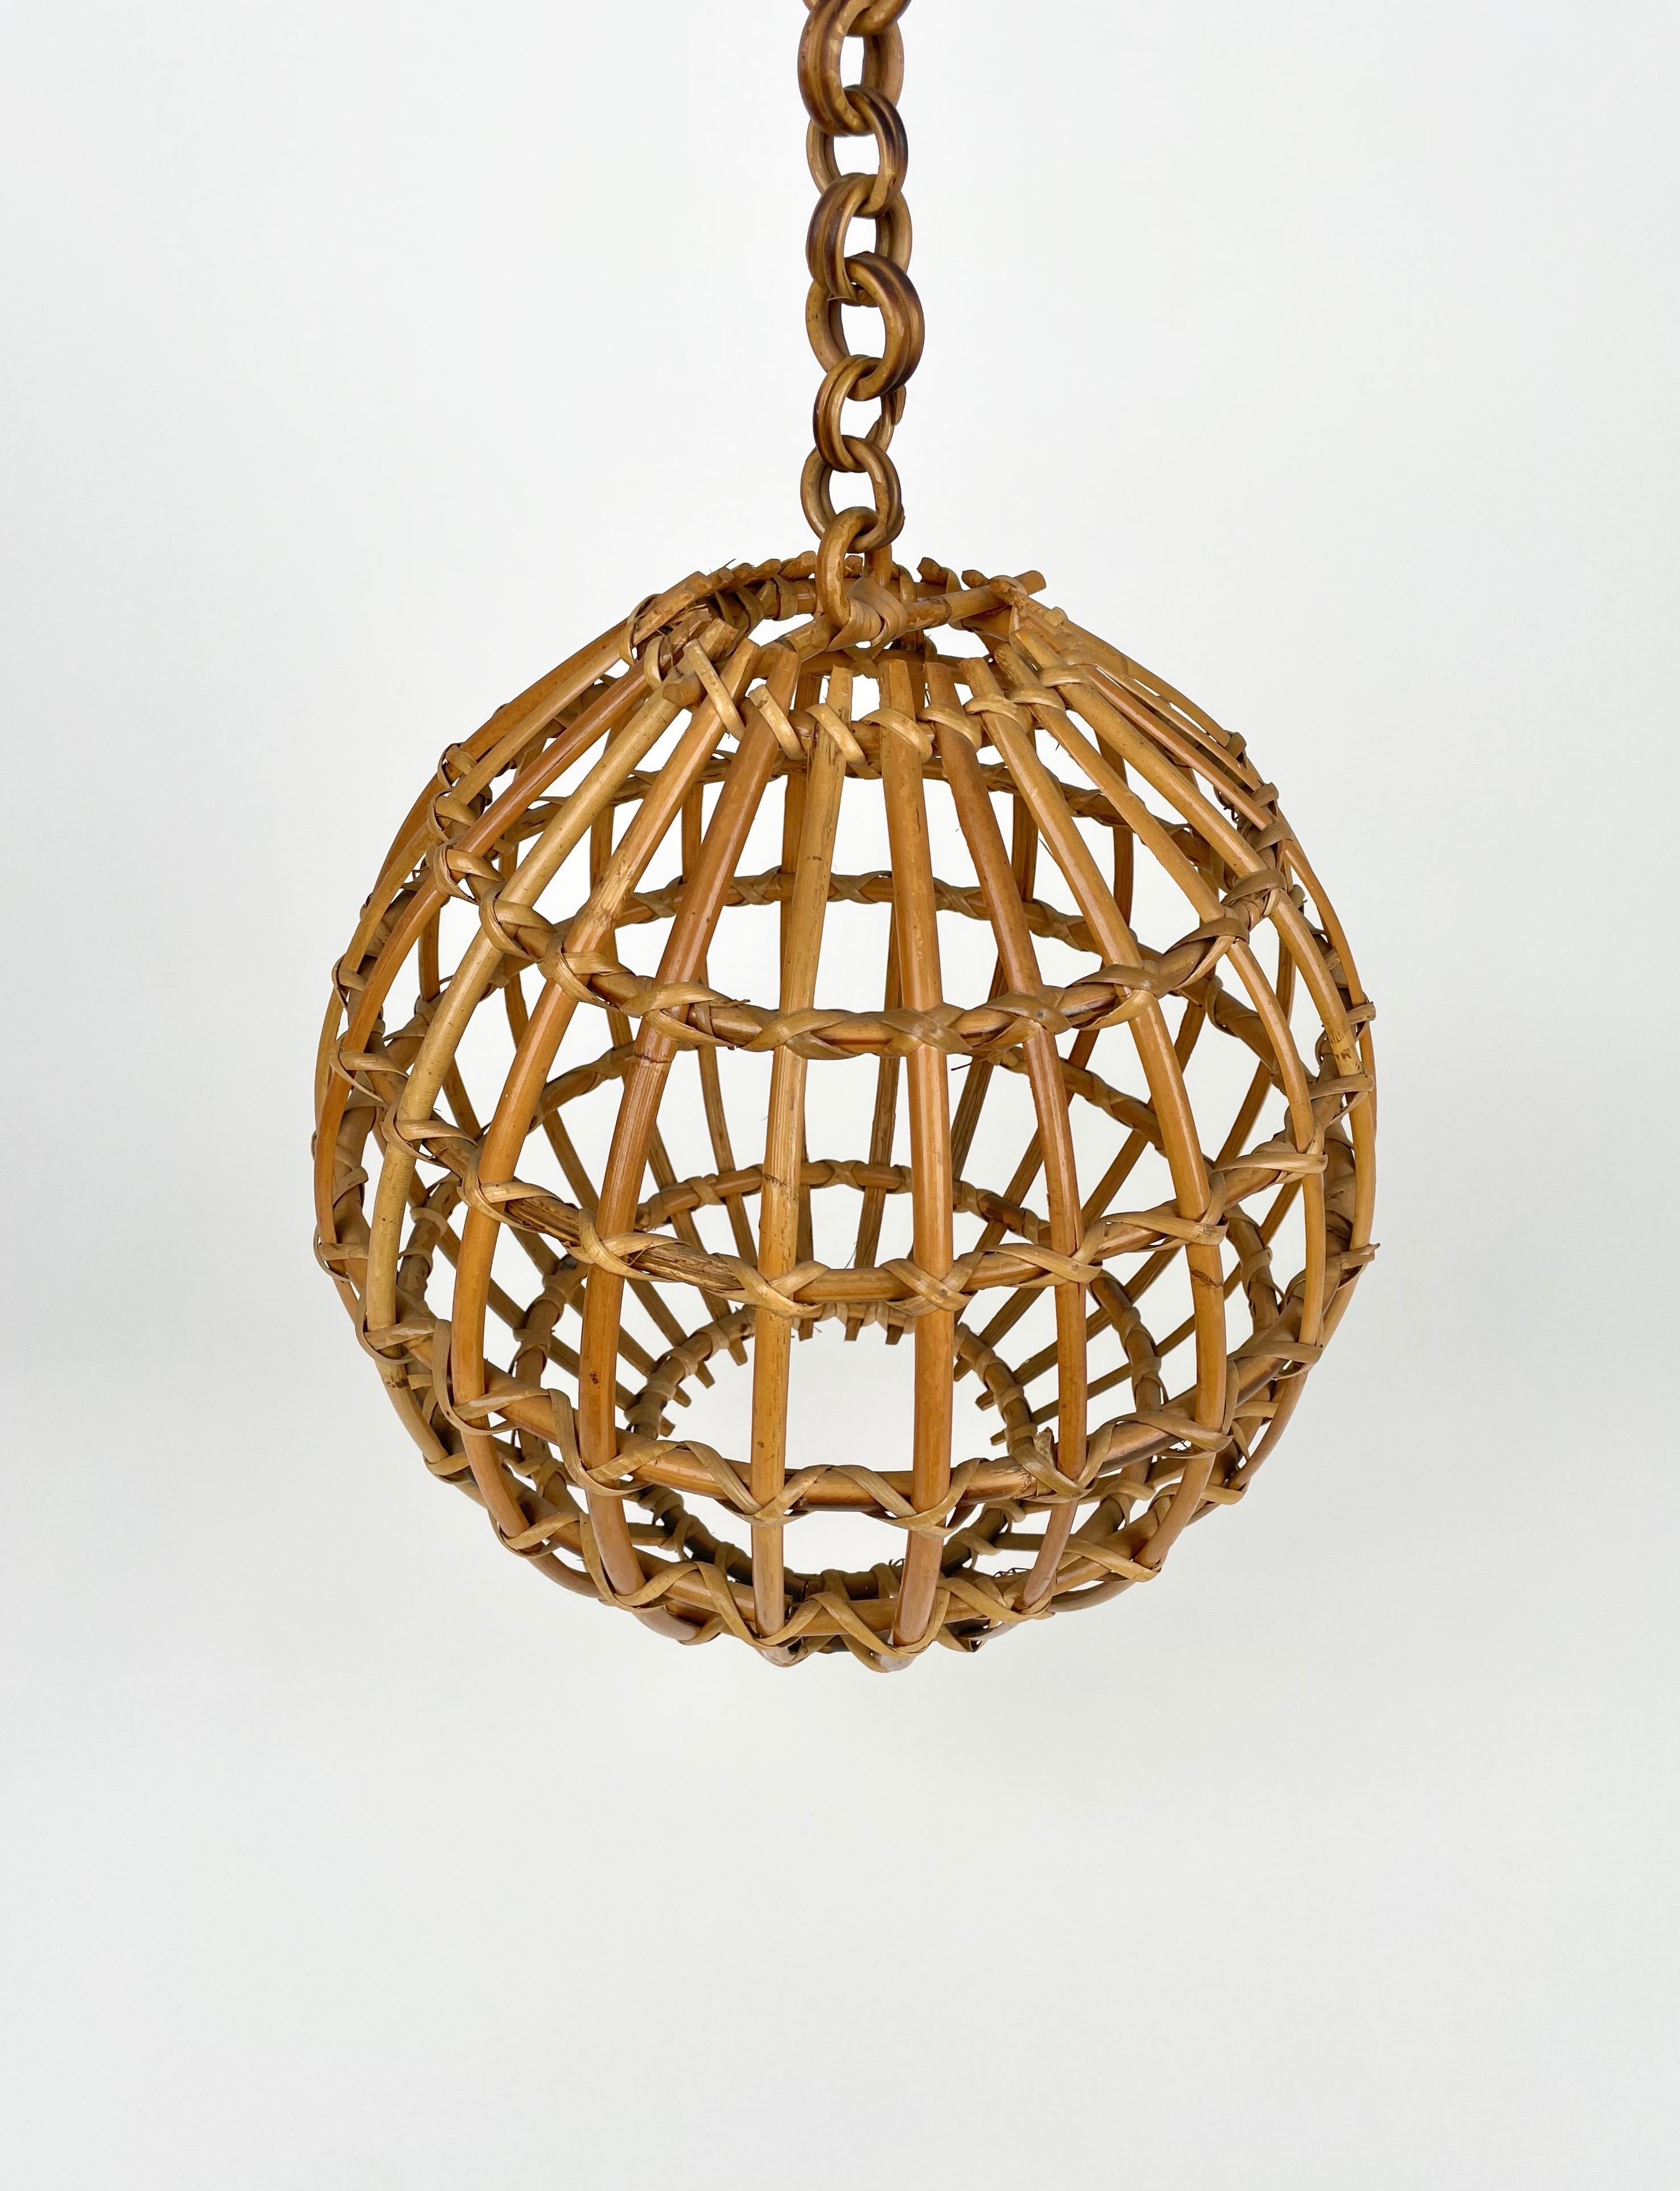 Rattan Globe Pendant Ceiling Lamp, Italy 1960s For Sale 1